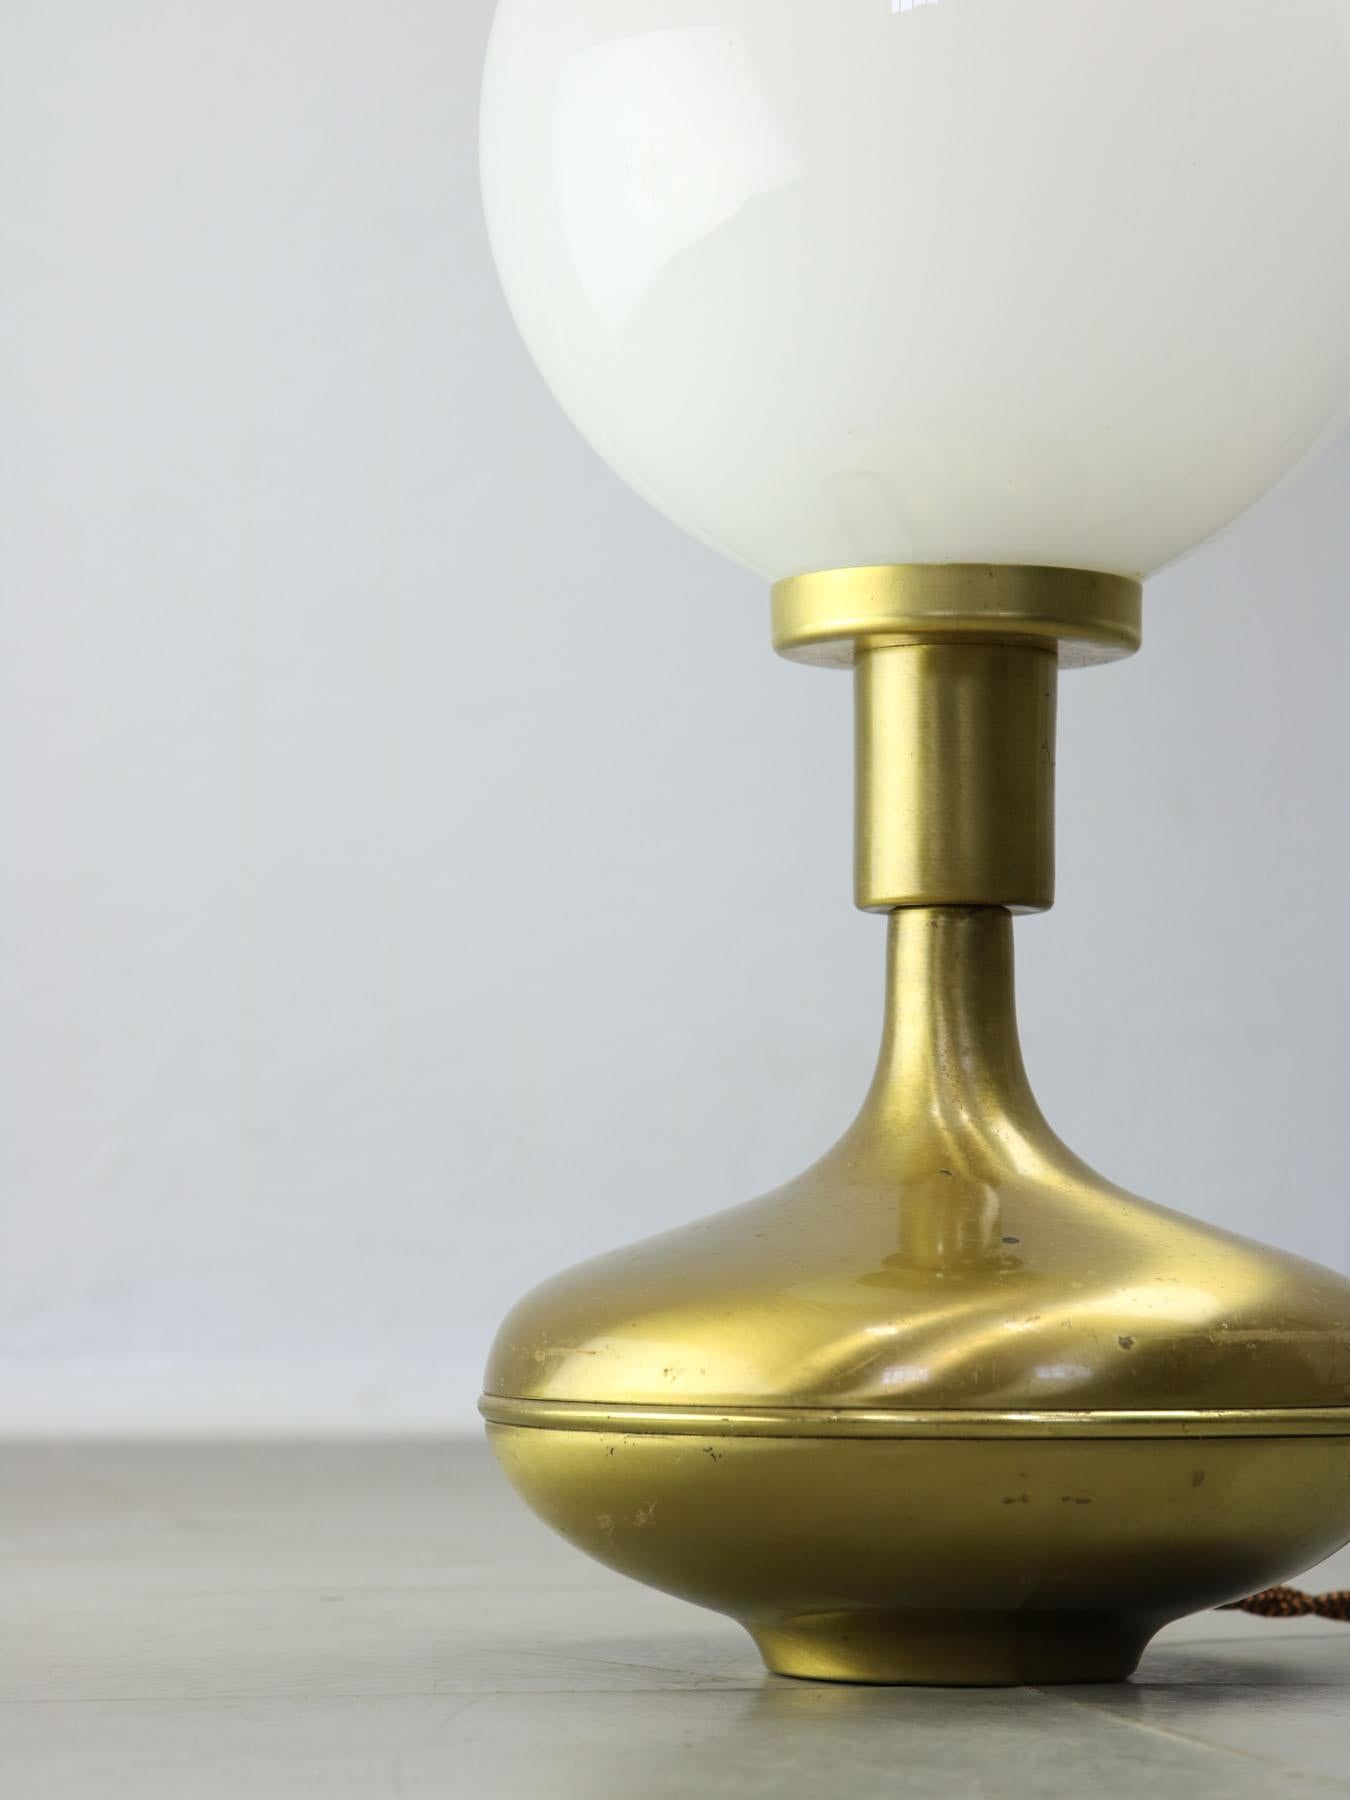 Beautifully formed table lamp in brass and opaline glass. 

The lamp socket is designed for standard European E14 light-bulb (not included).

For US customers, an adapter for the lightbulb (E14 to E12) will be added to the package. Additionally